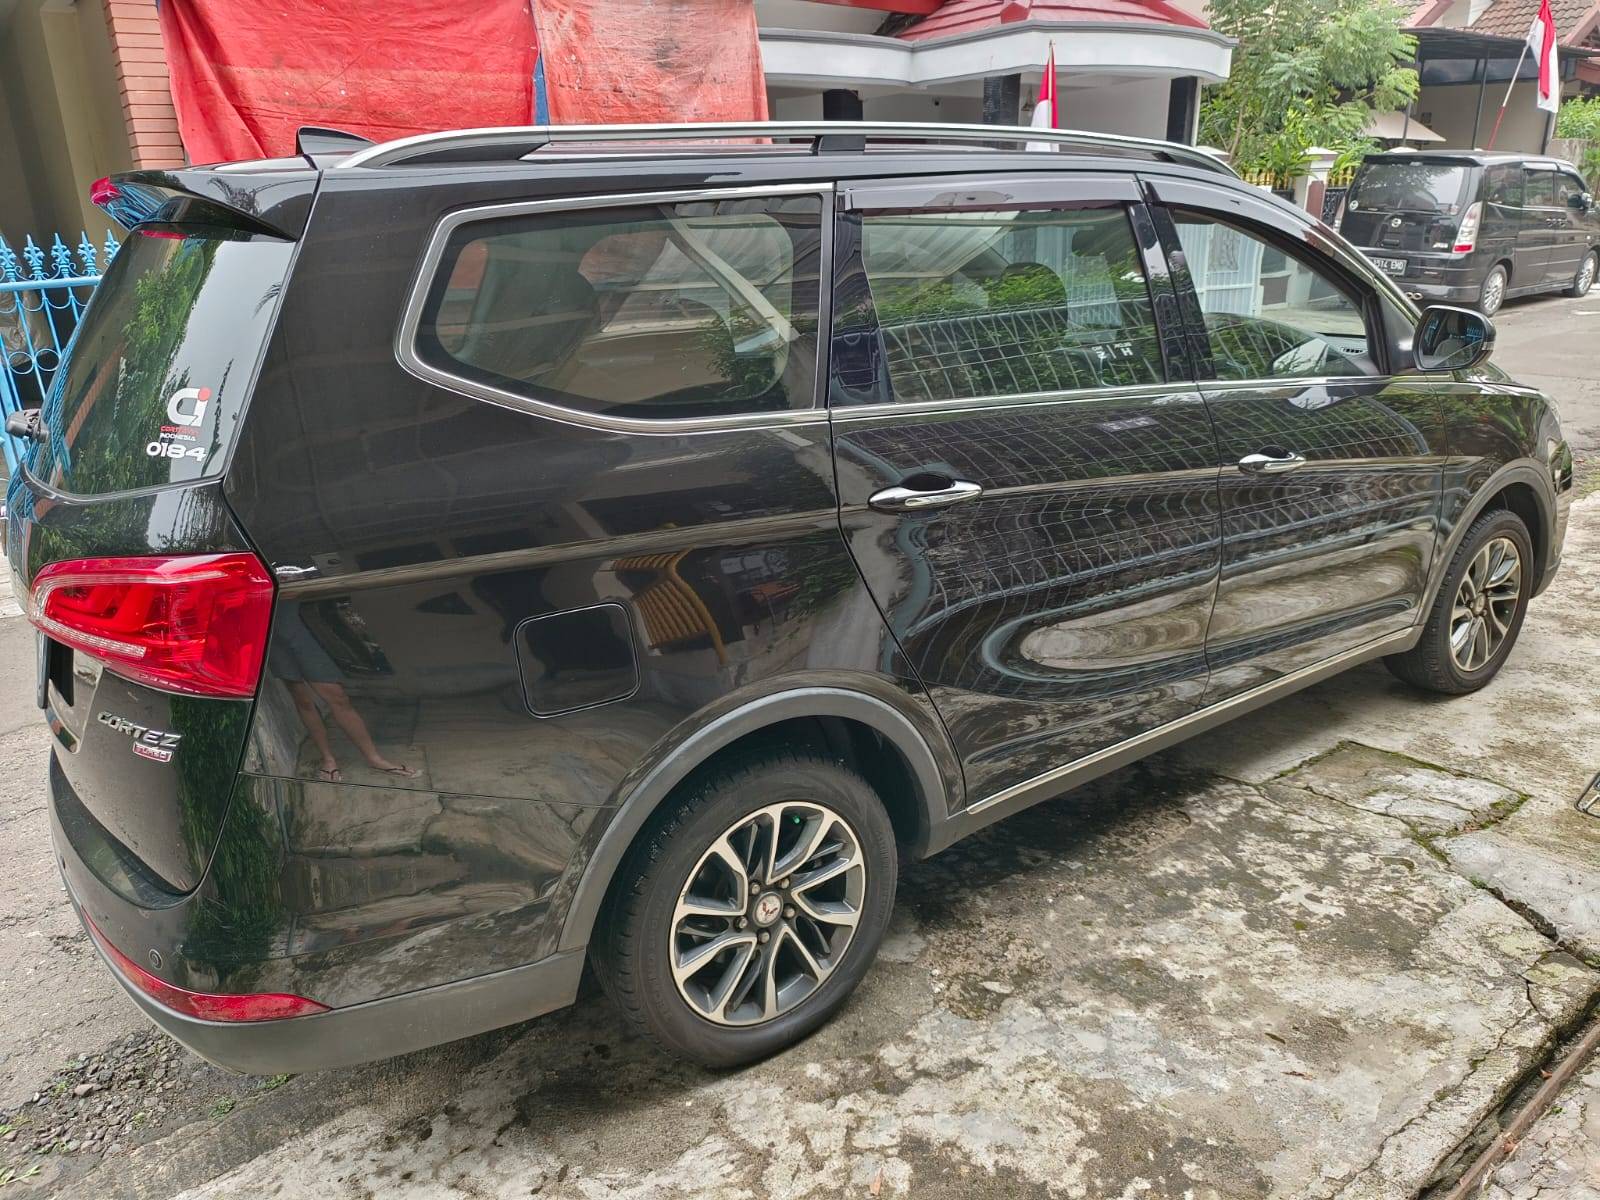 Old 2019 Wuling Cortez 1.5 L TURBO AT LUX 1.5 L TURBO AT LUX